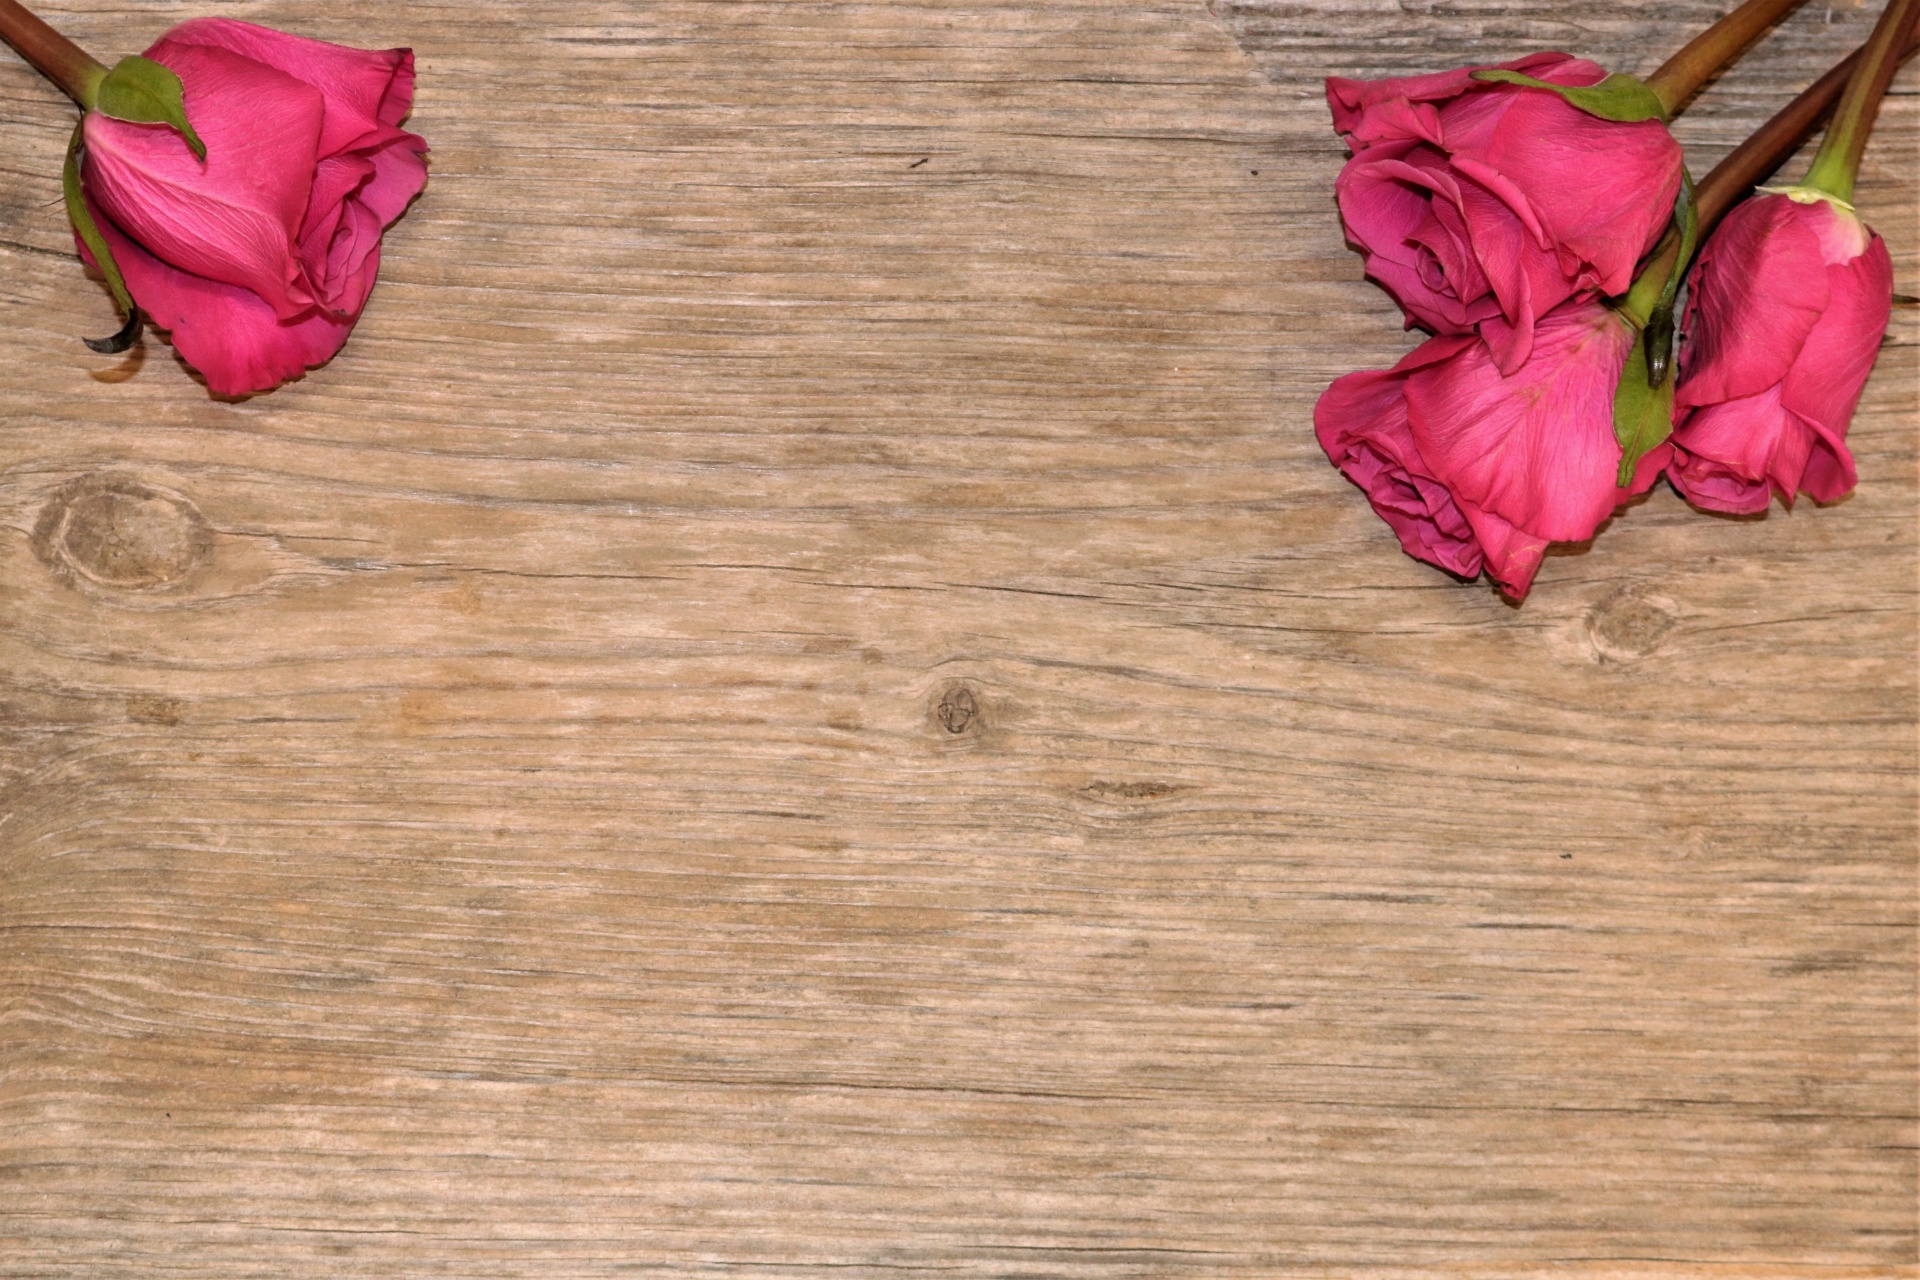 Four pink roses frame a wood grain background with room for text.